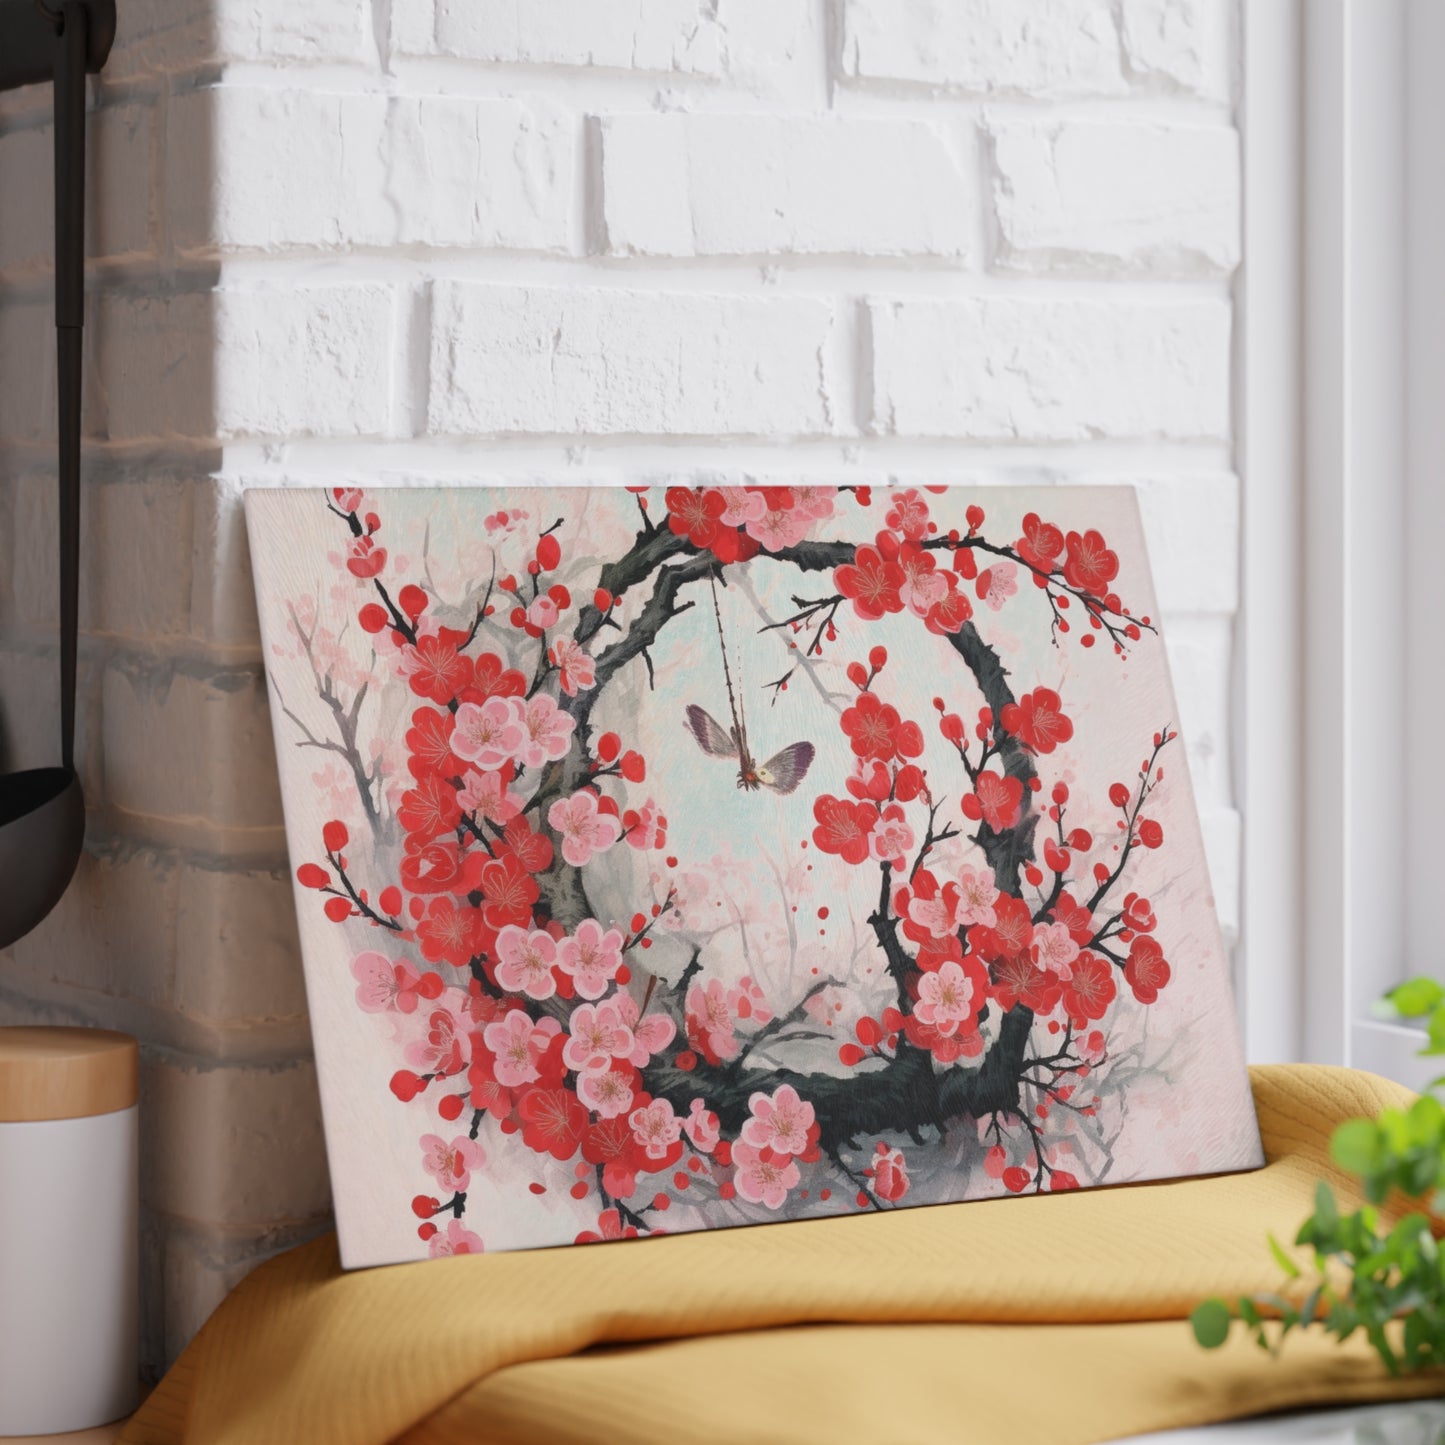 Cherry Blossom Delight: Glass Cutting Board Adorned with Intricate Flower Drawings and Artistry